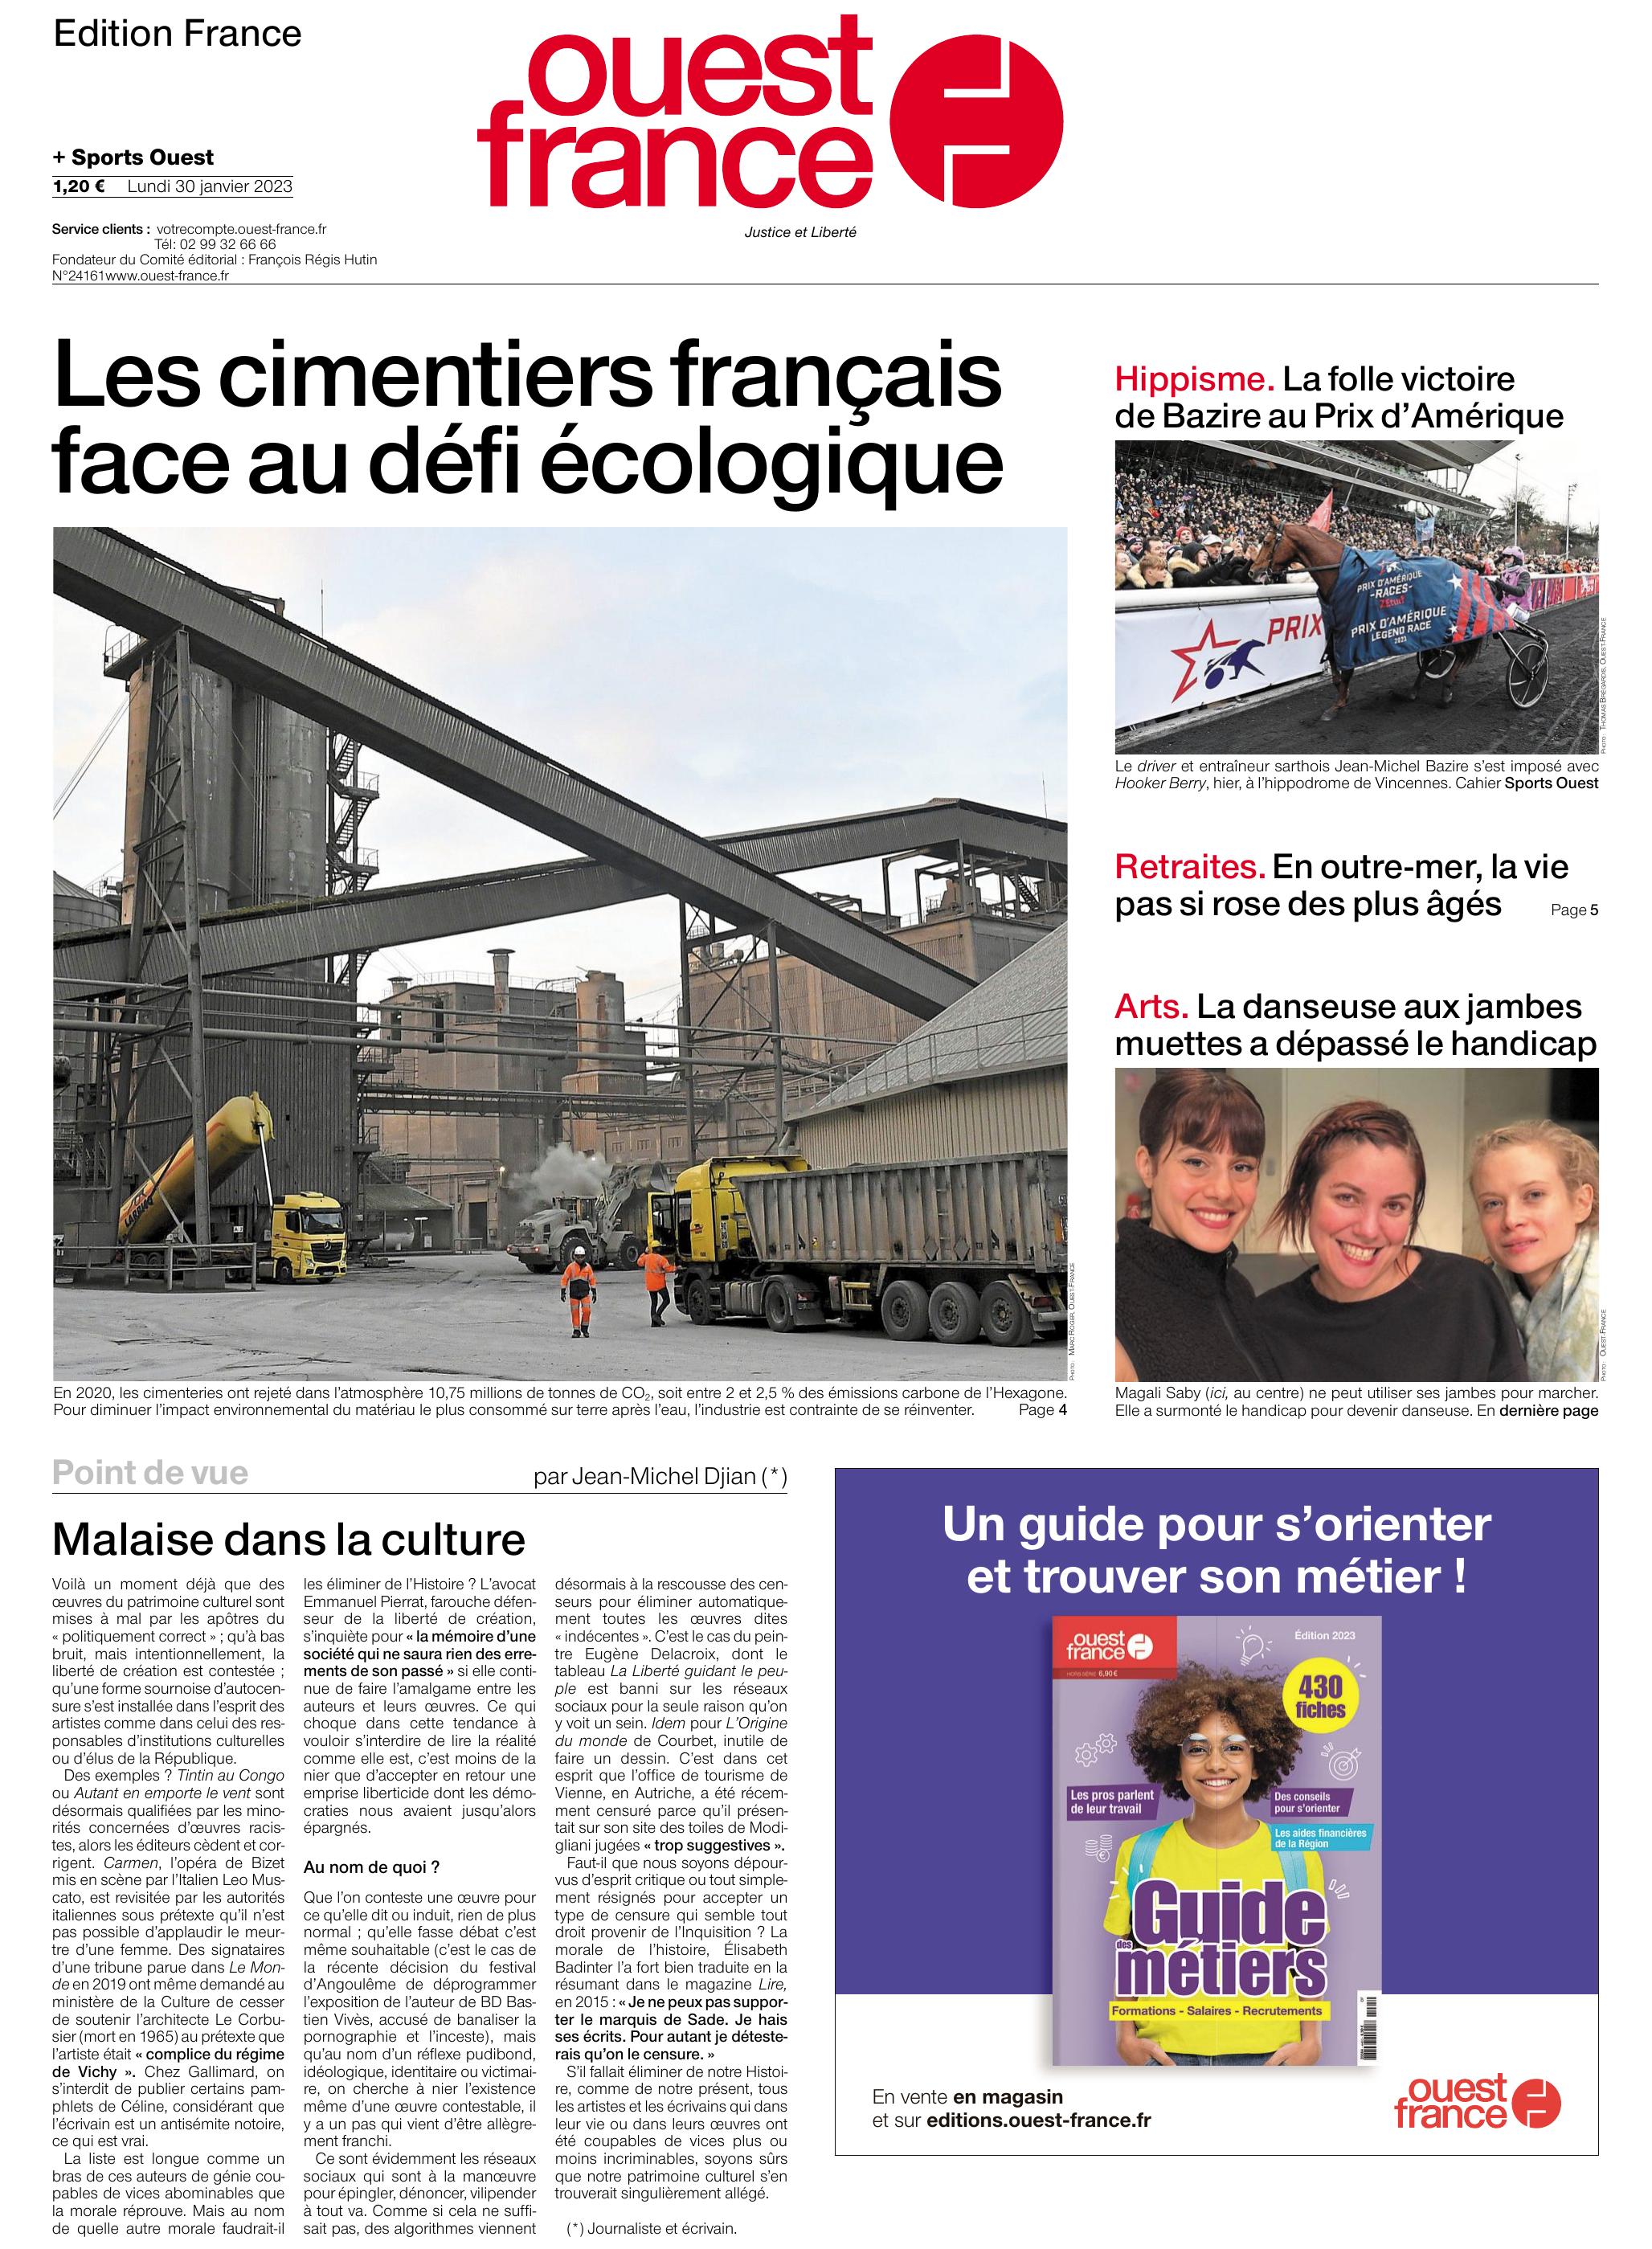 Journal Ouest France ed France 30-01-2023 by Unknown